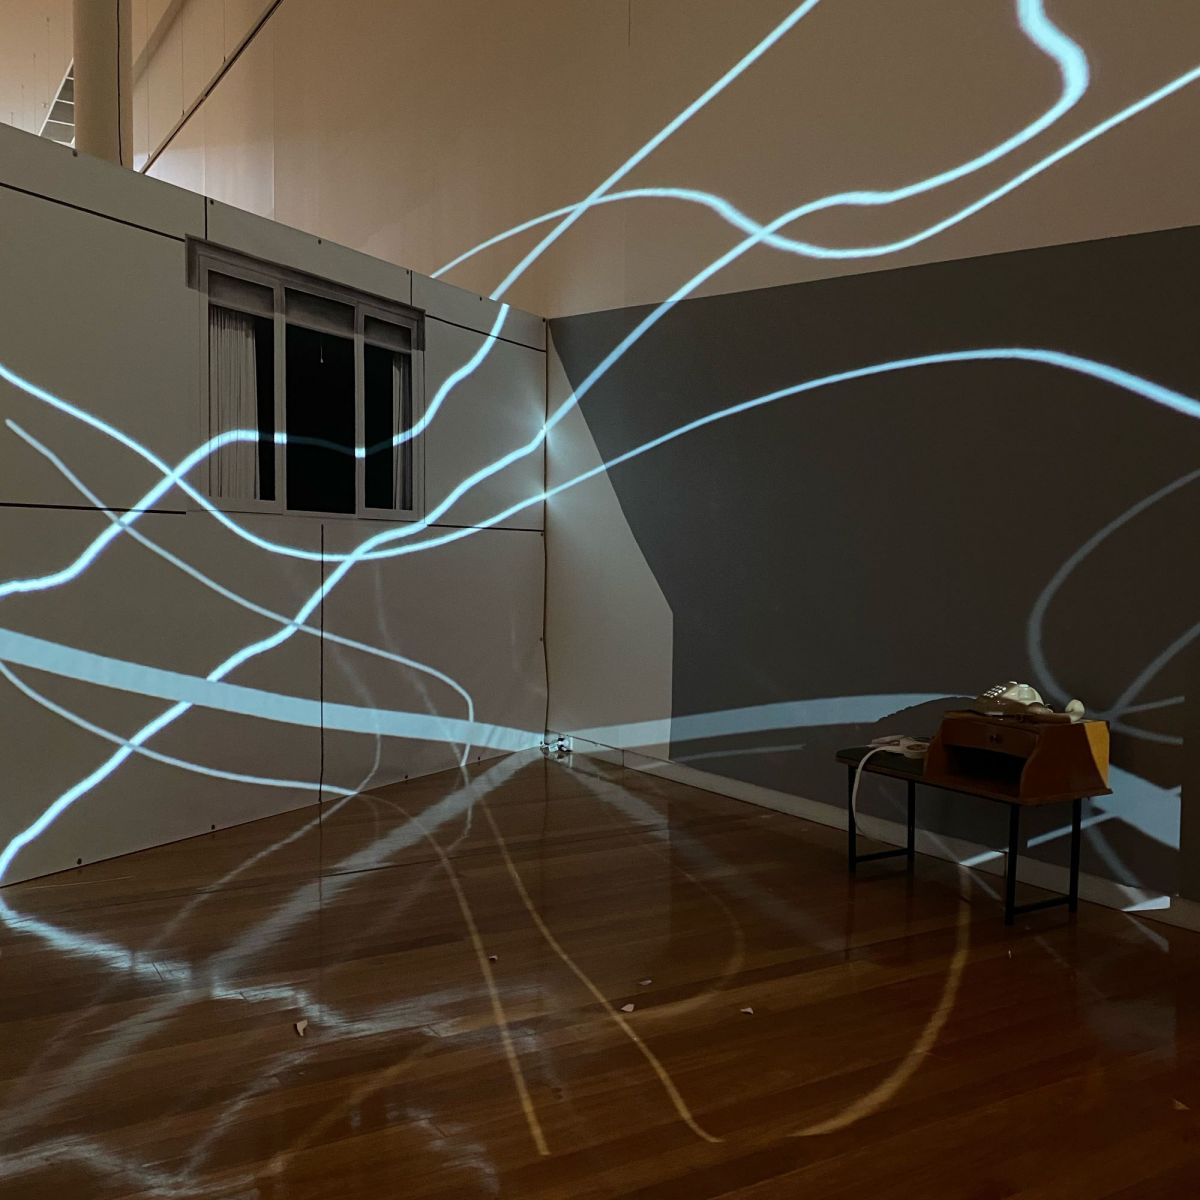 Light beams projected across a room